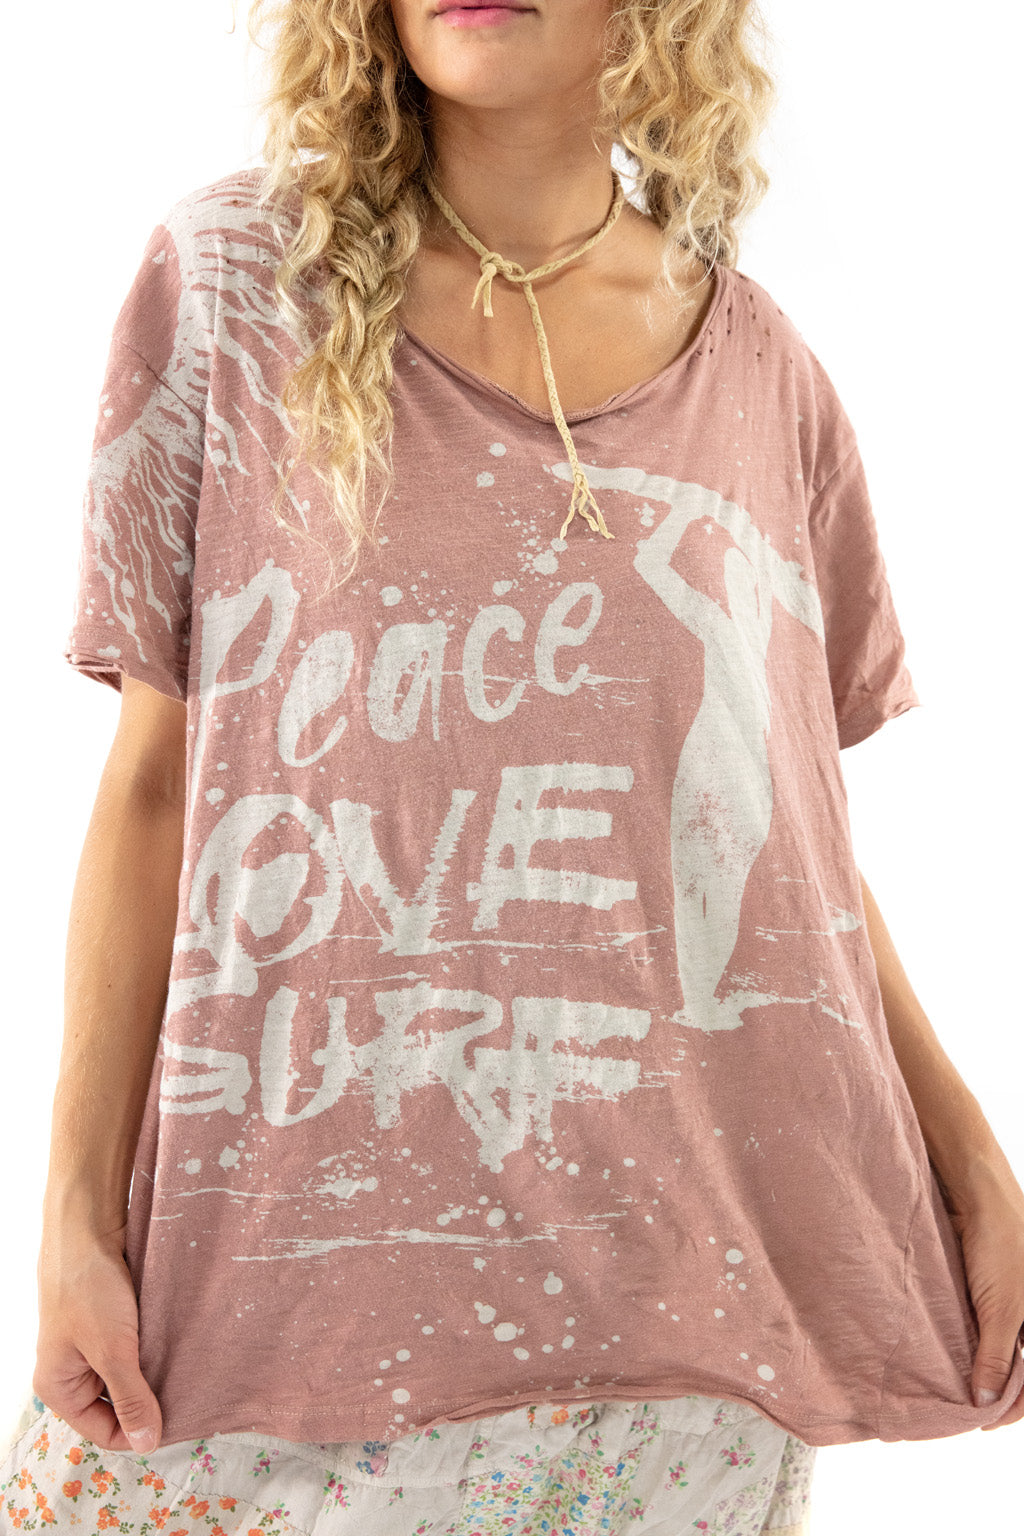 Peace, Love, and Surf T in Bison